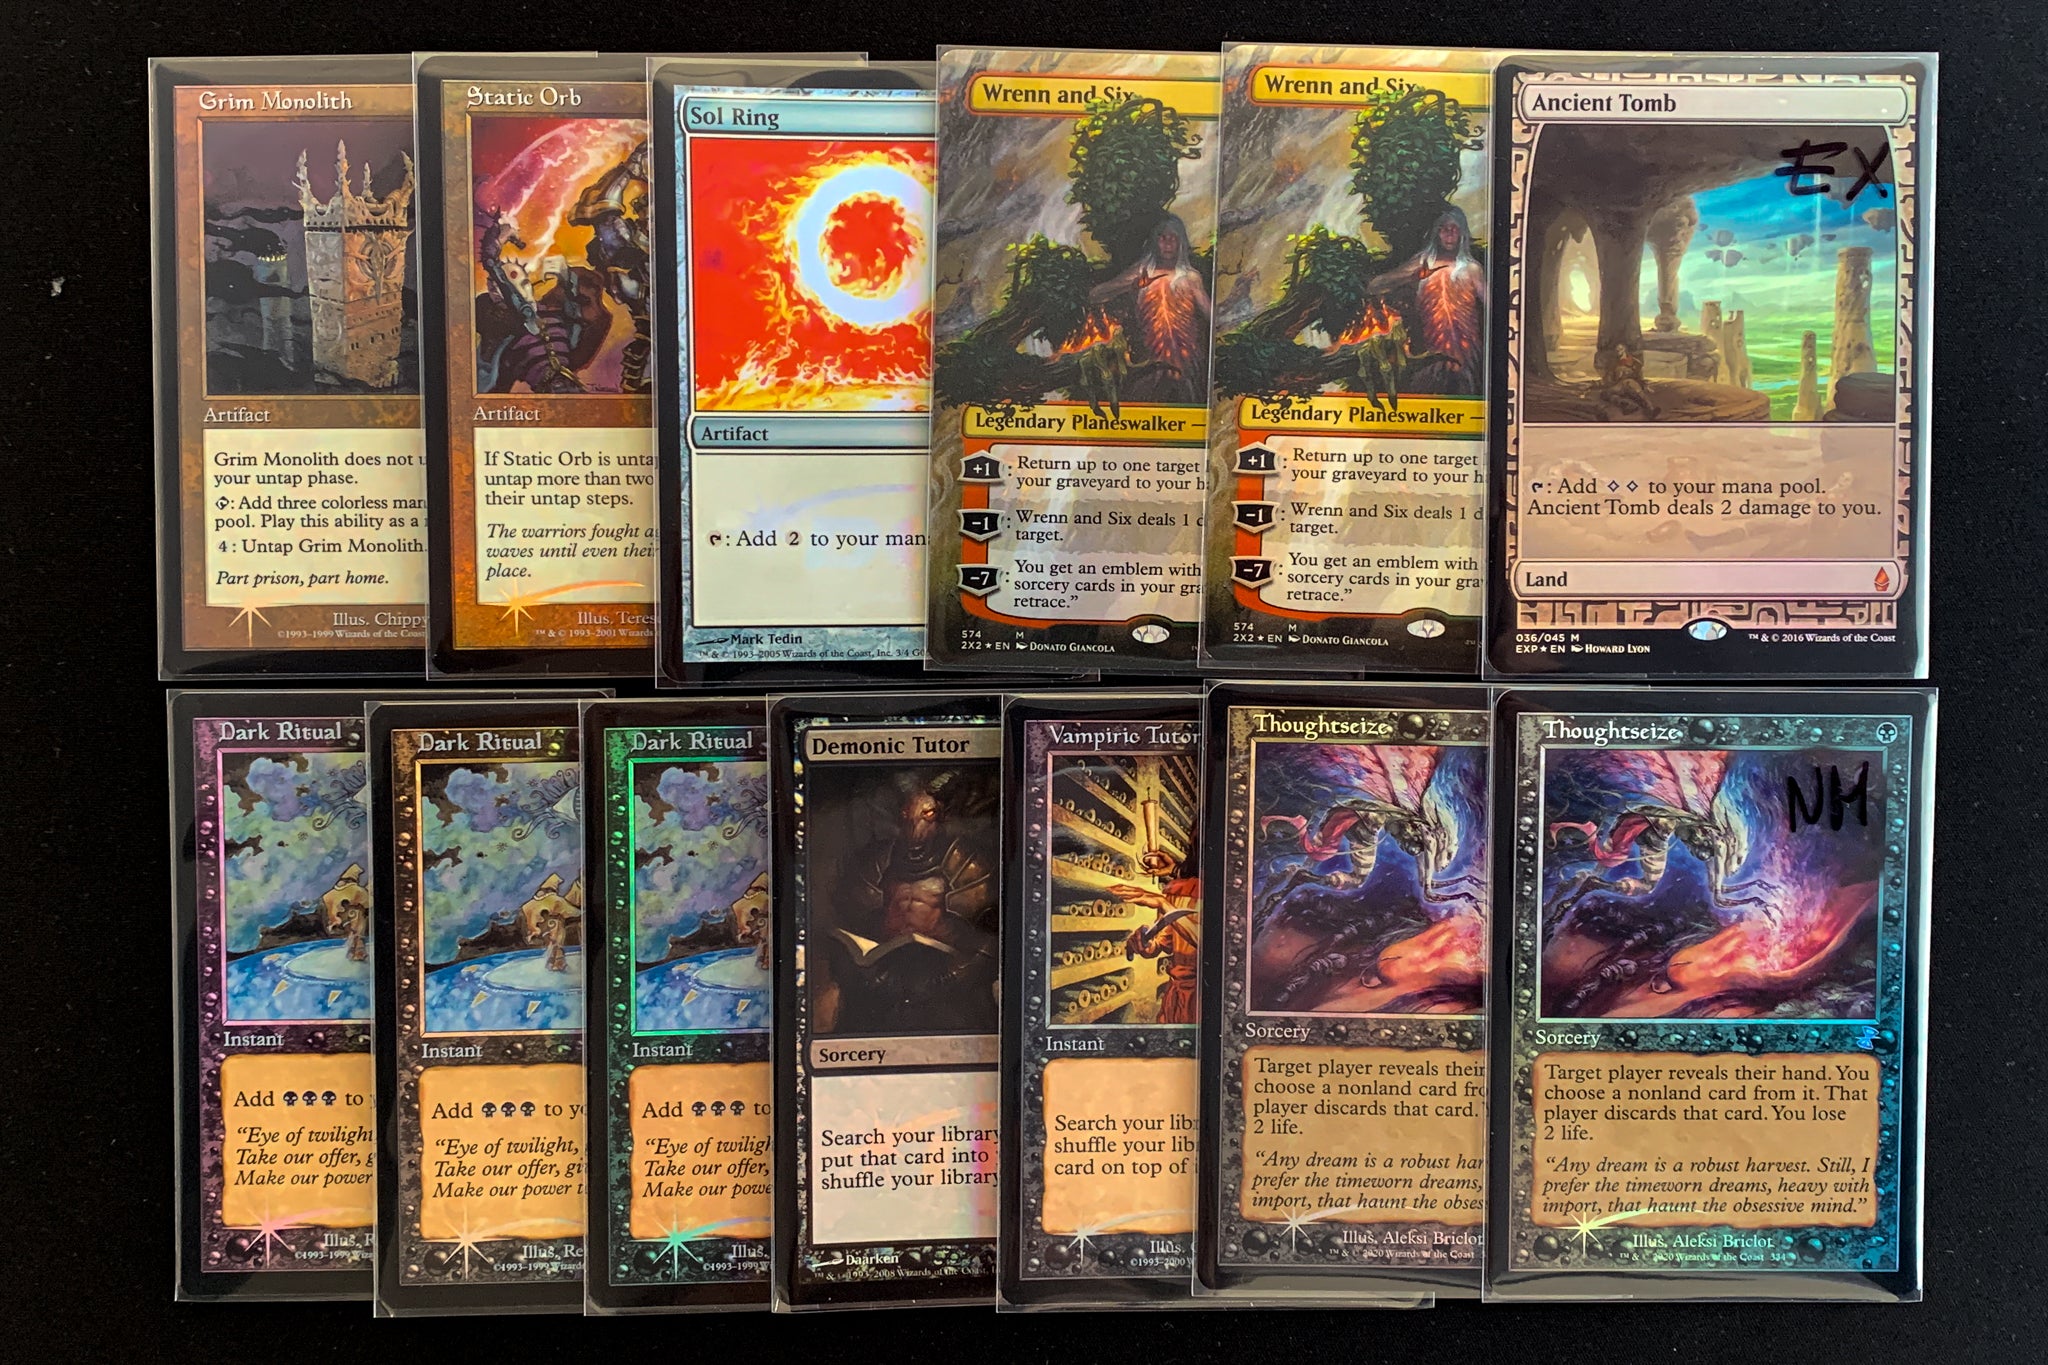 New Arrivals: Full Urza's Saga, two Timetwisters and amazing Foils!